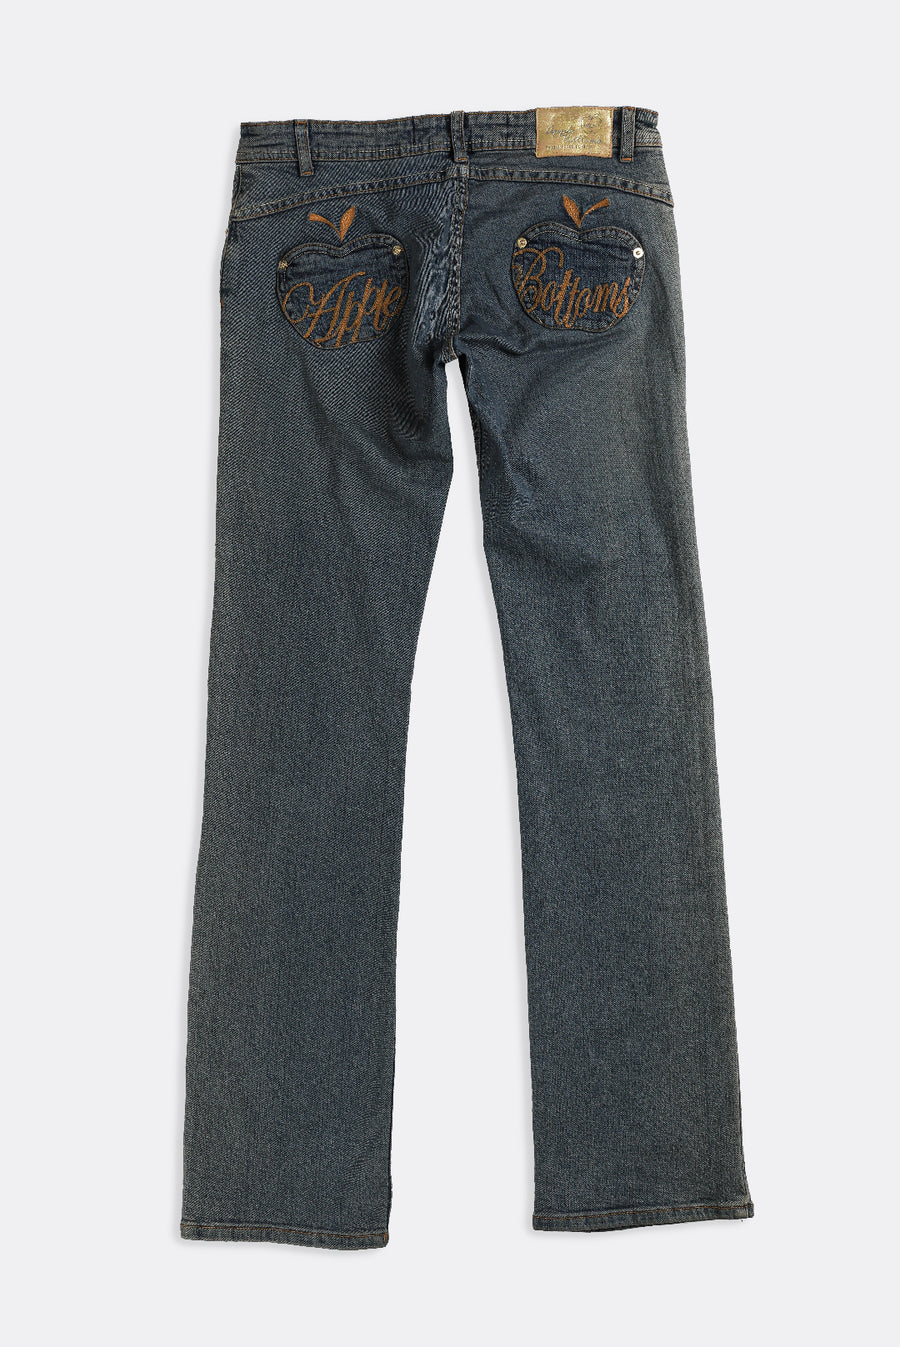 Deadstock Apple Bottom Classic Embroidered Denim Pants - W32